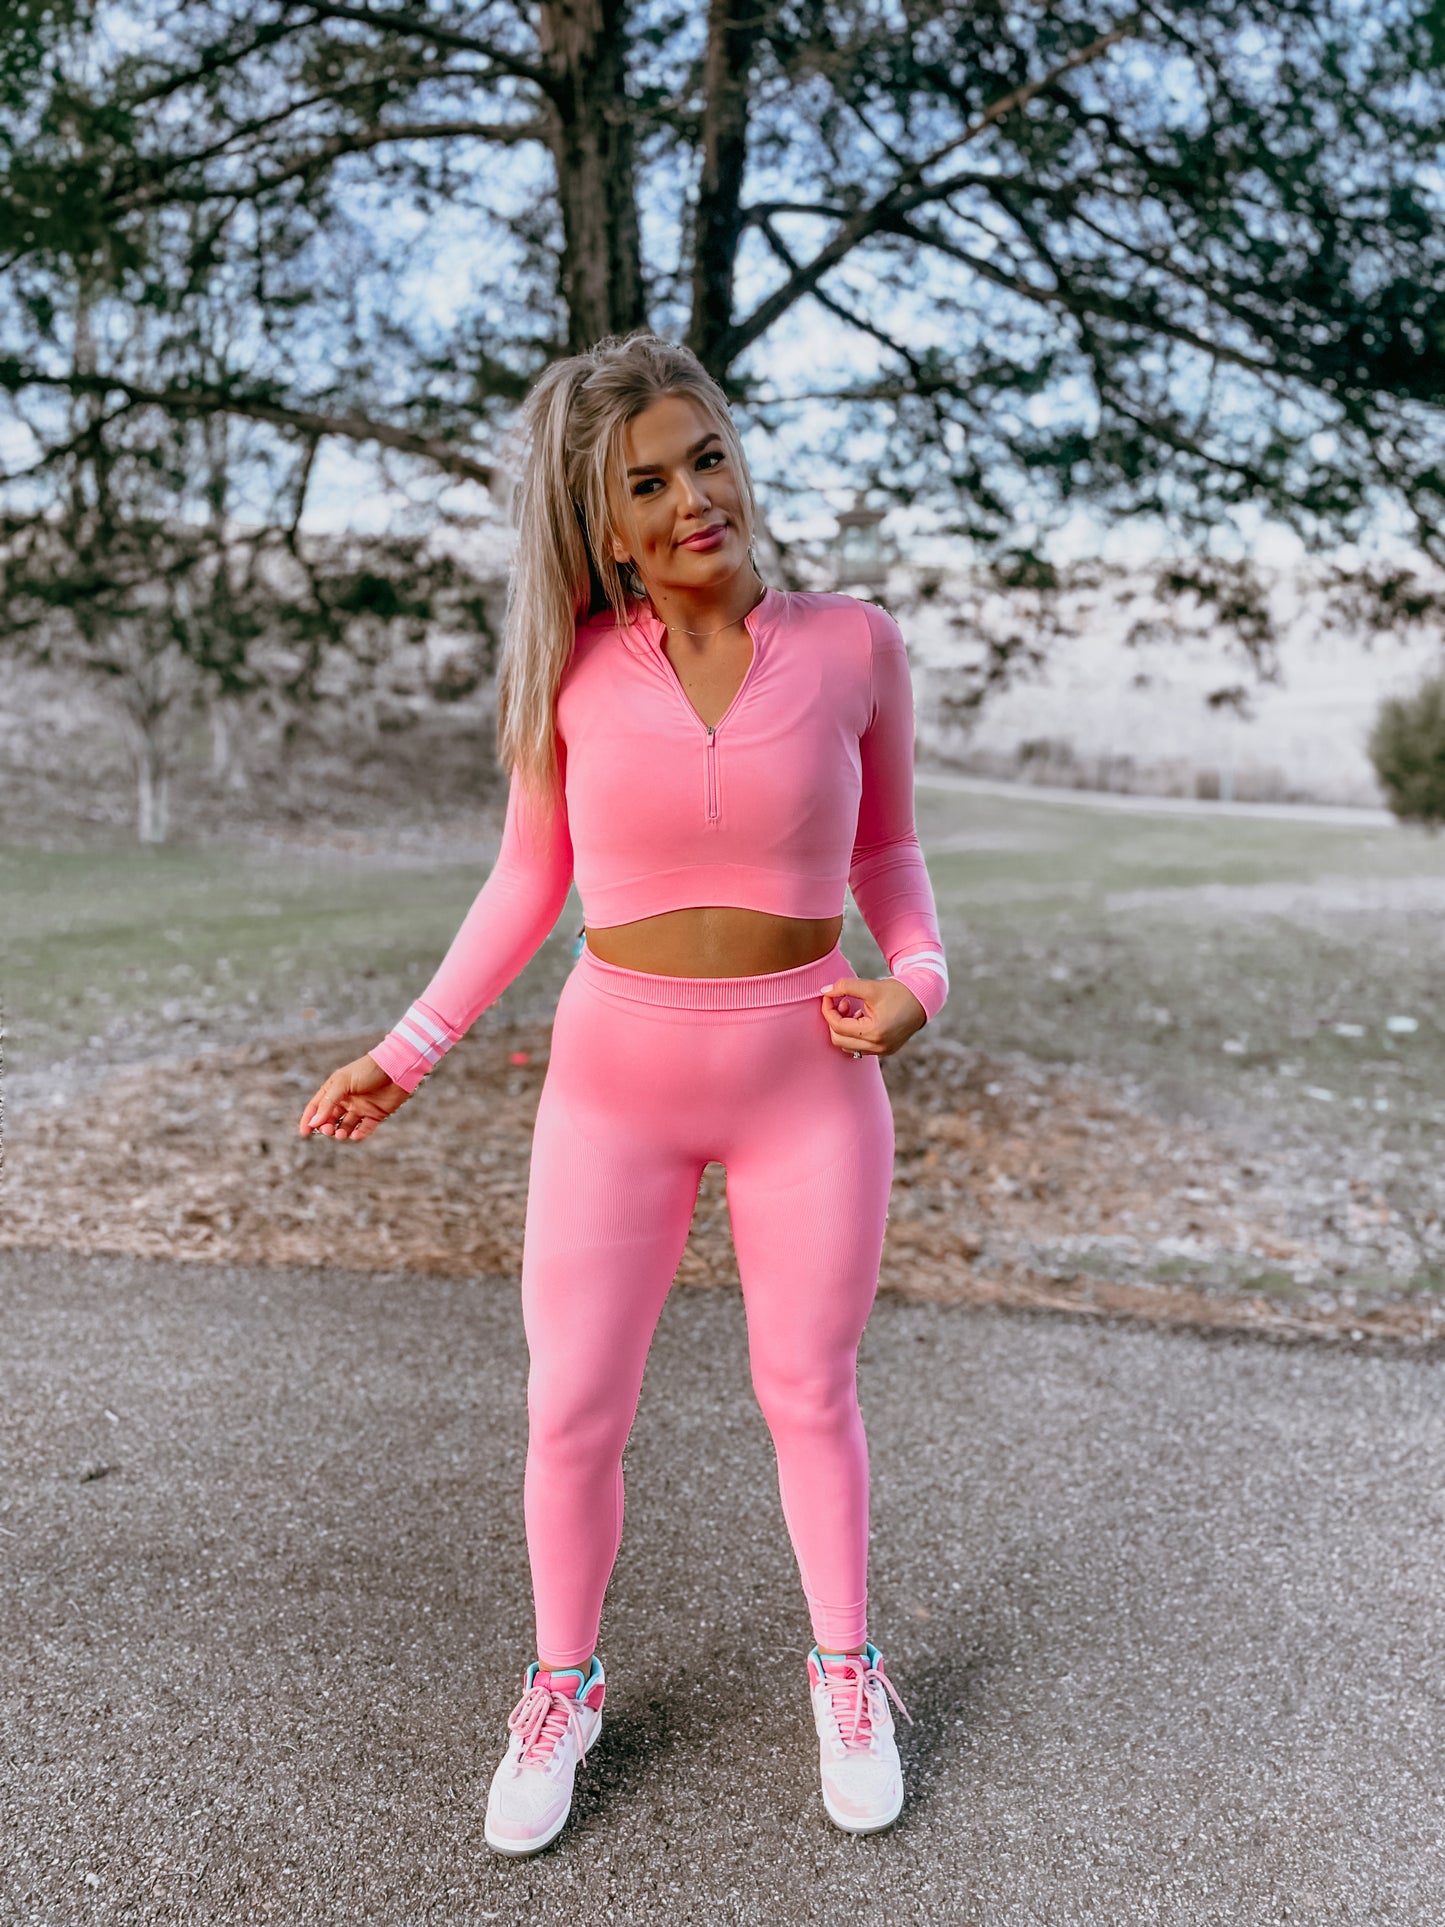 Work out Barbie-style: 7 best-selling pink fitness items like leggings,  tumblers, 'Barbie-bells' and more from Stanley, Lululemon, others 